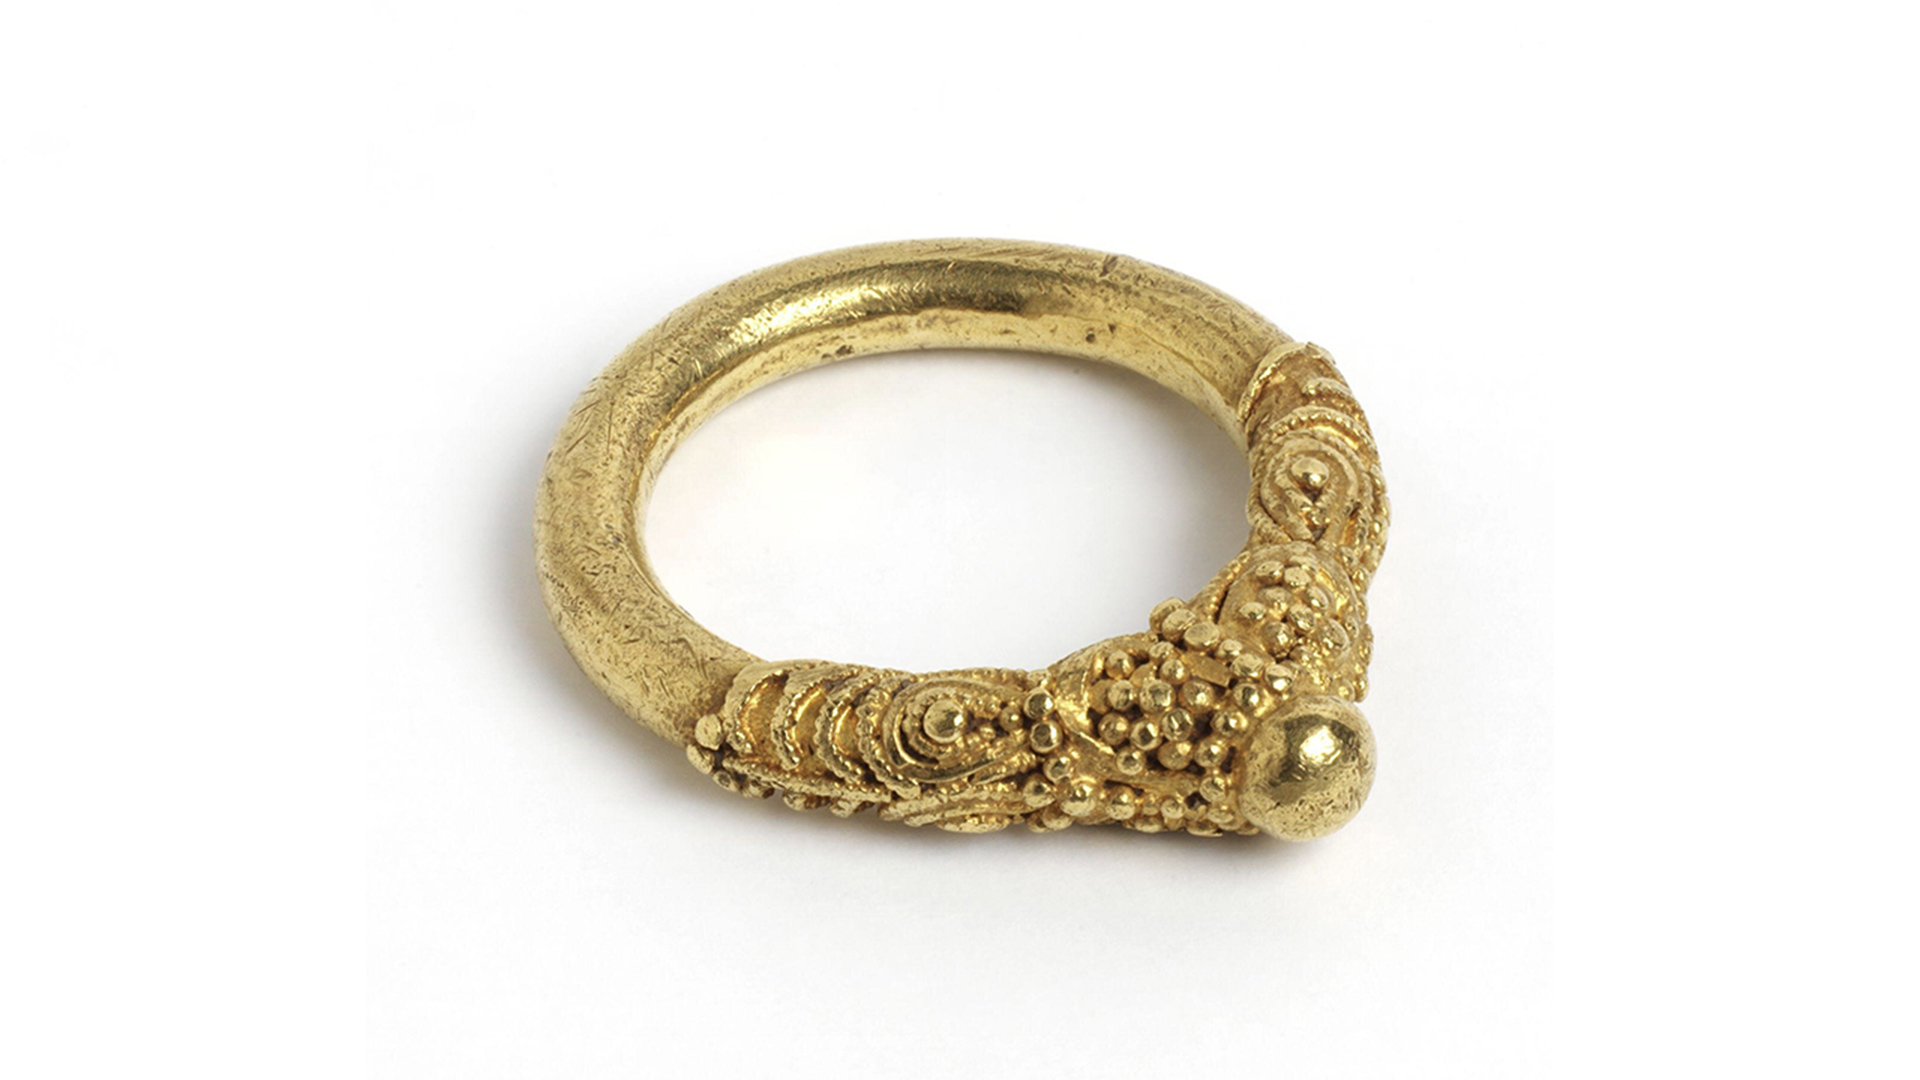 Gold ring decorated with filigree